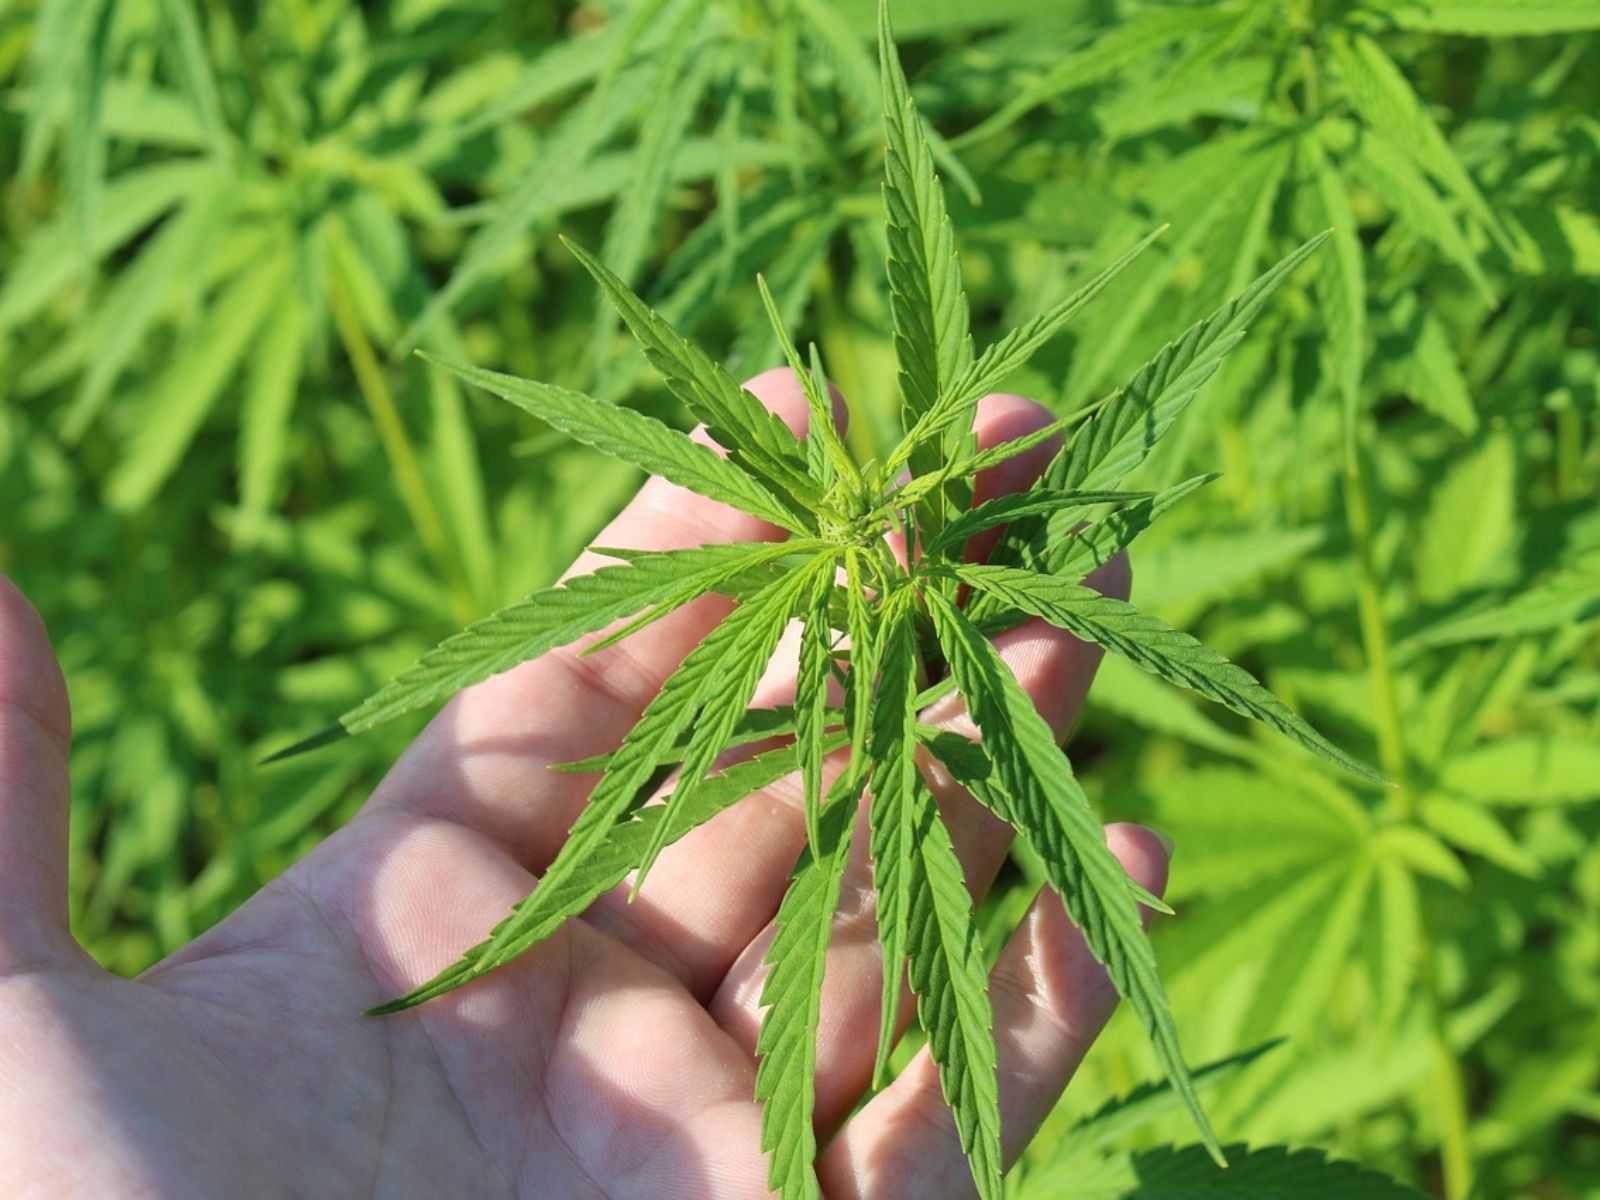 How Many Hemp Businesses Are Located In Louisiana?